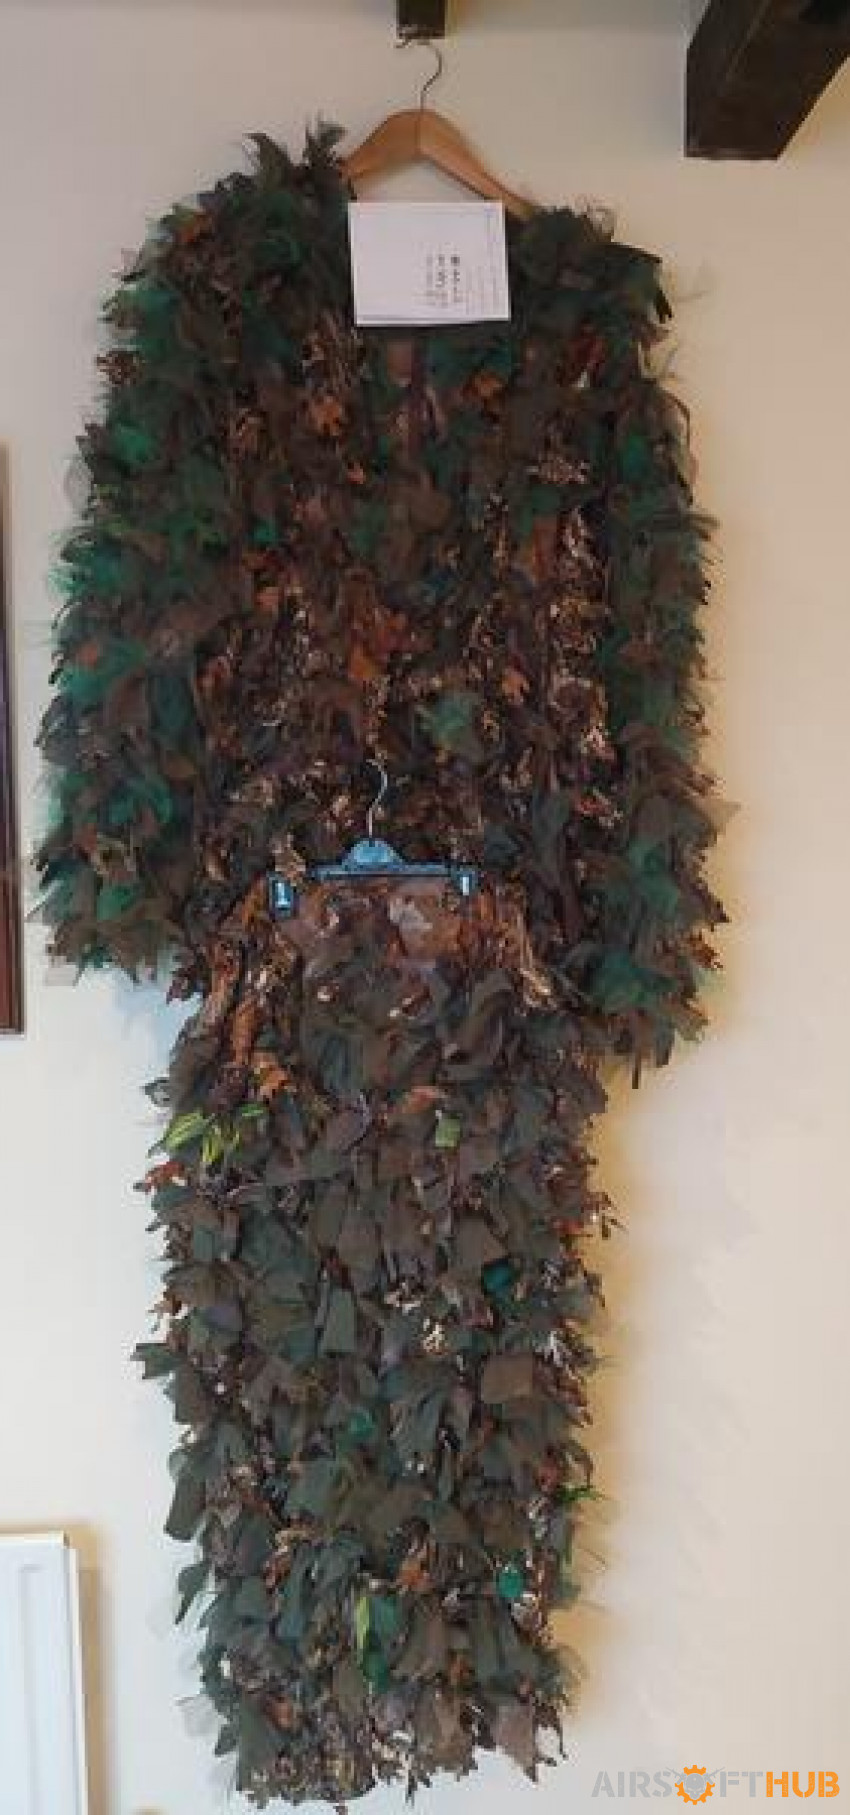 Ghillie Suit for Sale - Used airsoft equipment